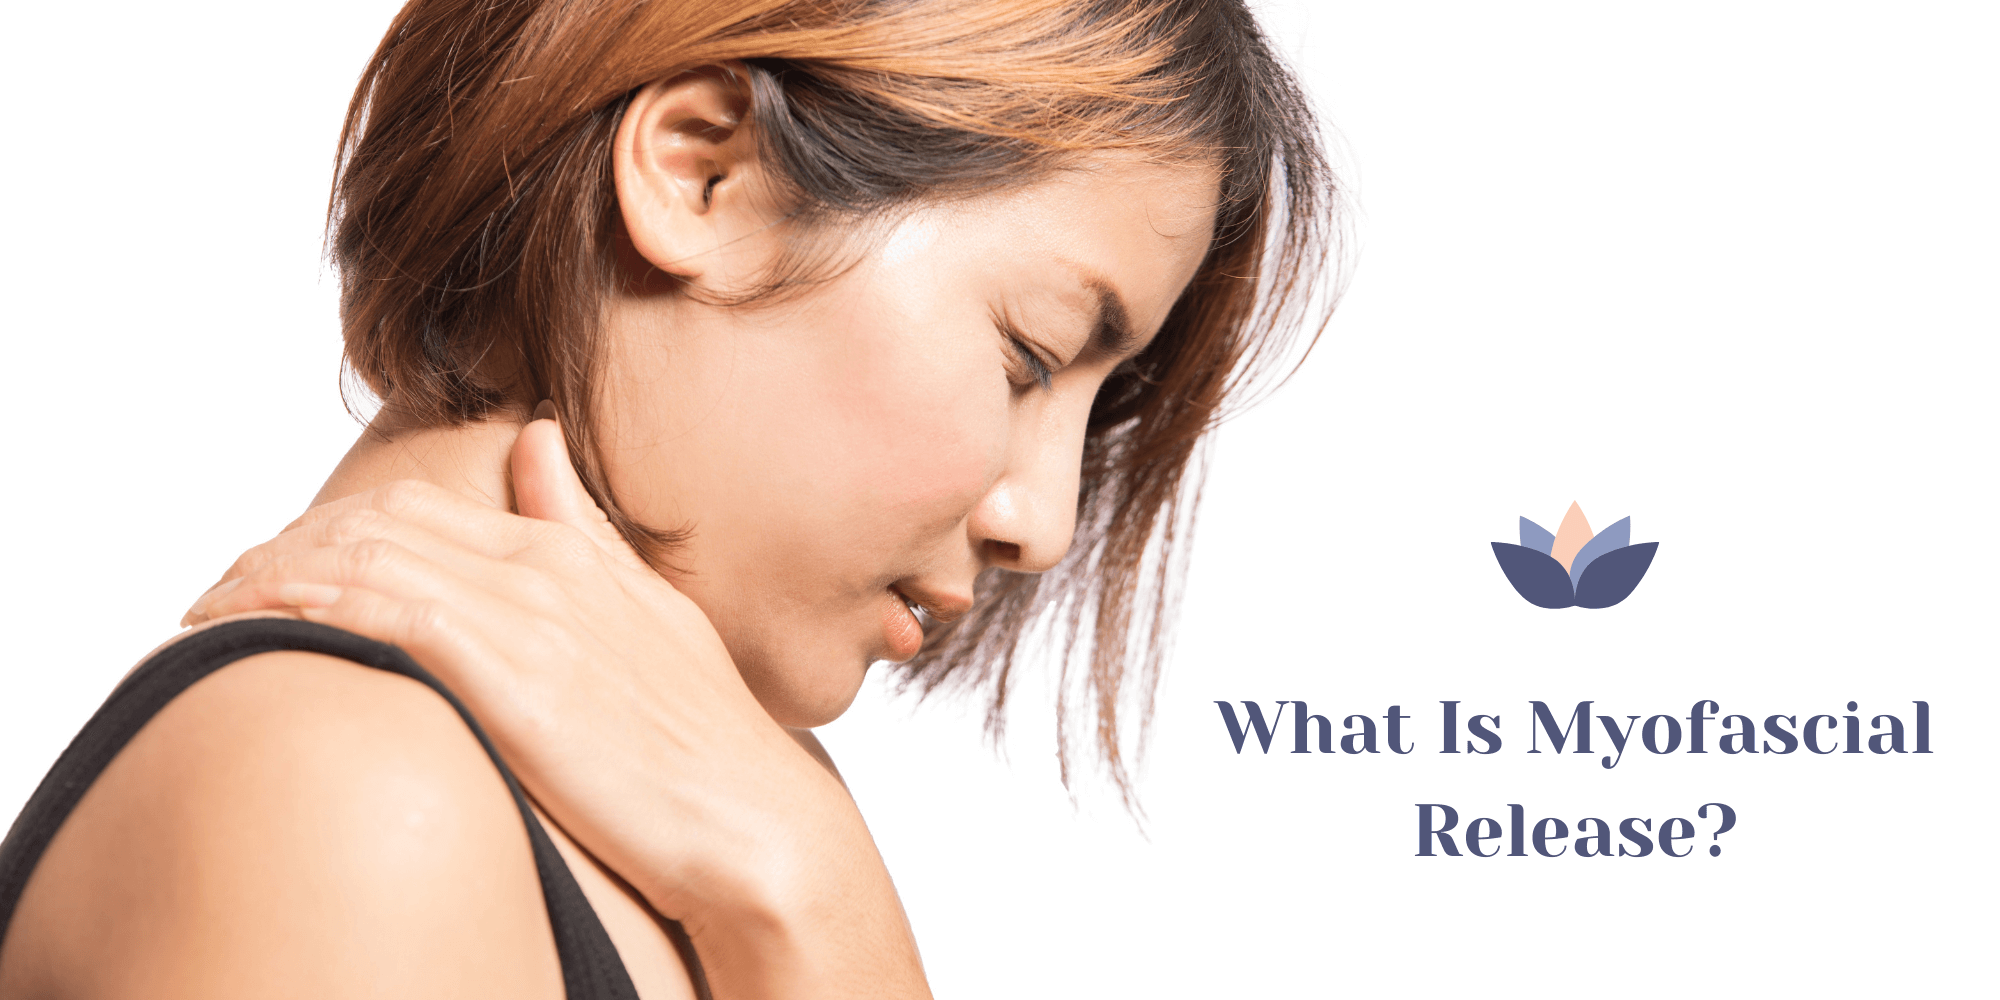 What Is Myofascial Release and Does It Work?